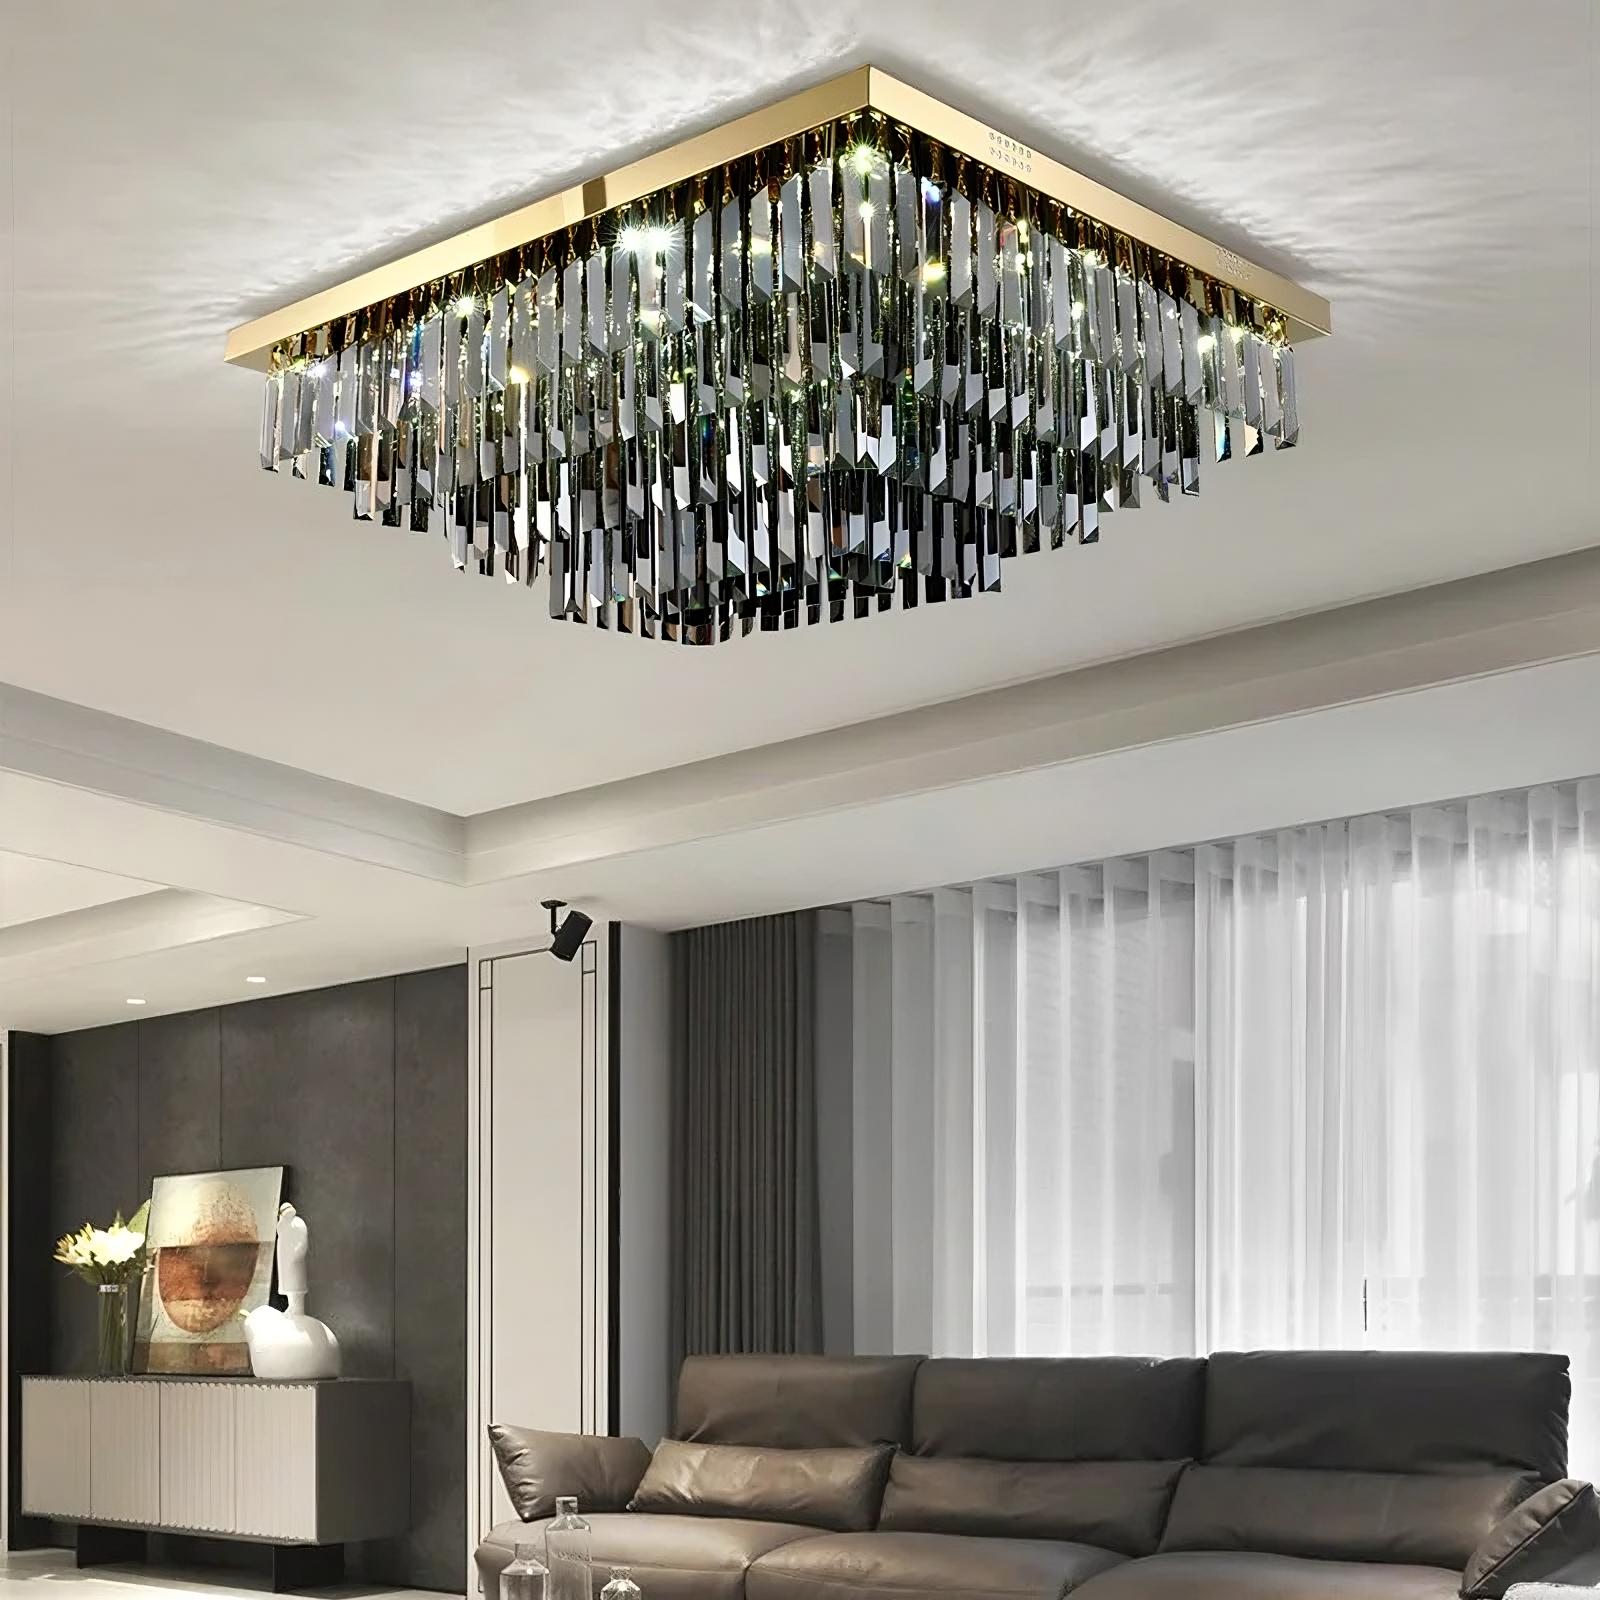 A modern living room featuring a large, rectangular Gio Smoke Grey Crystal Ceiling Chandelier by Morsale.com hanging from the ceiling. The chandelier has multiple dangling pieces, reflecting light. Below it, a comfortable brown leather sofa is positioned near large windows with sheer curtains, showcasing an elegant design.